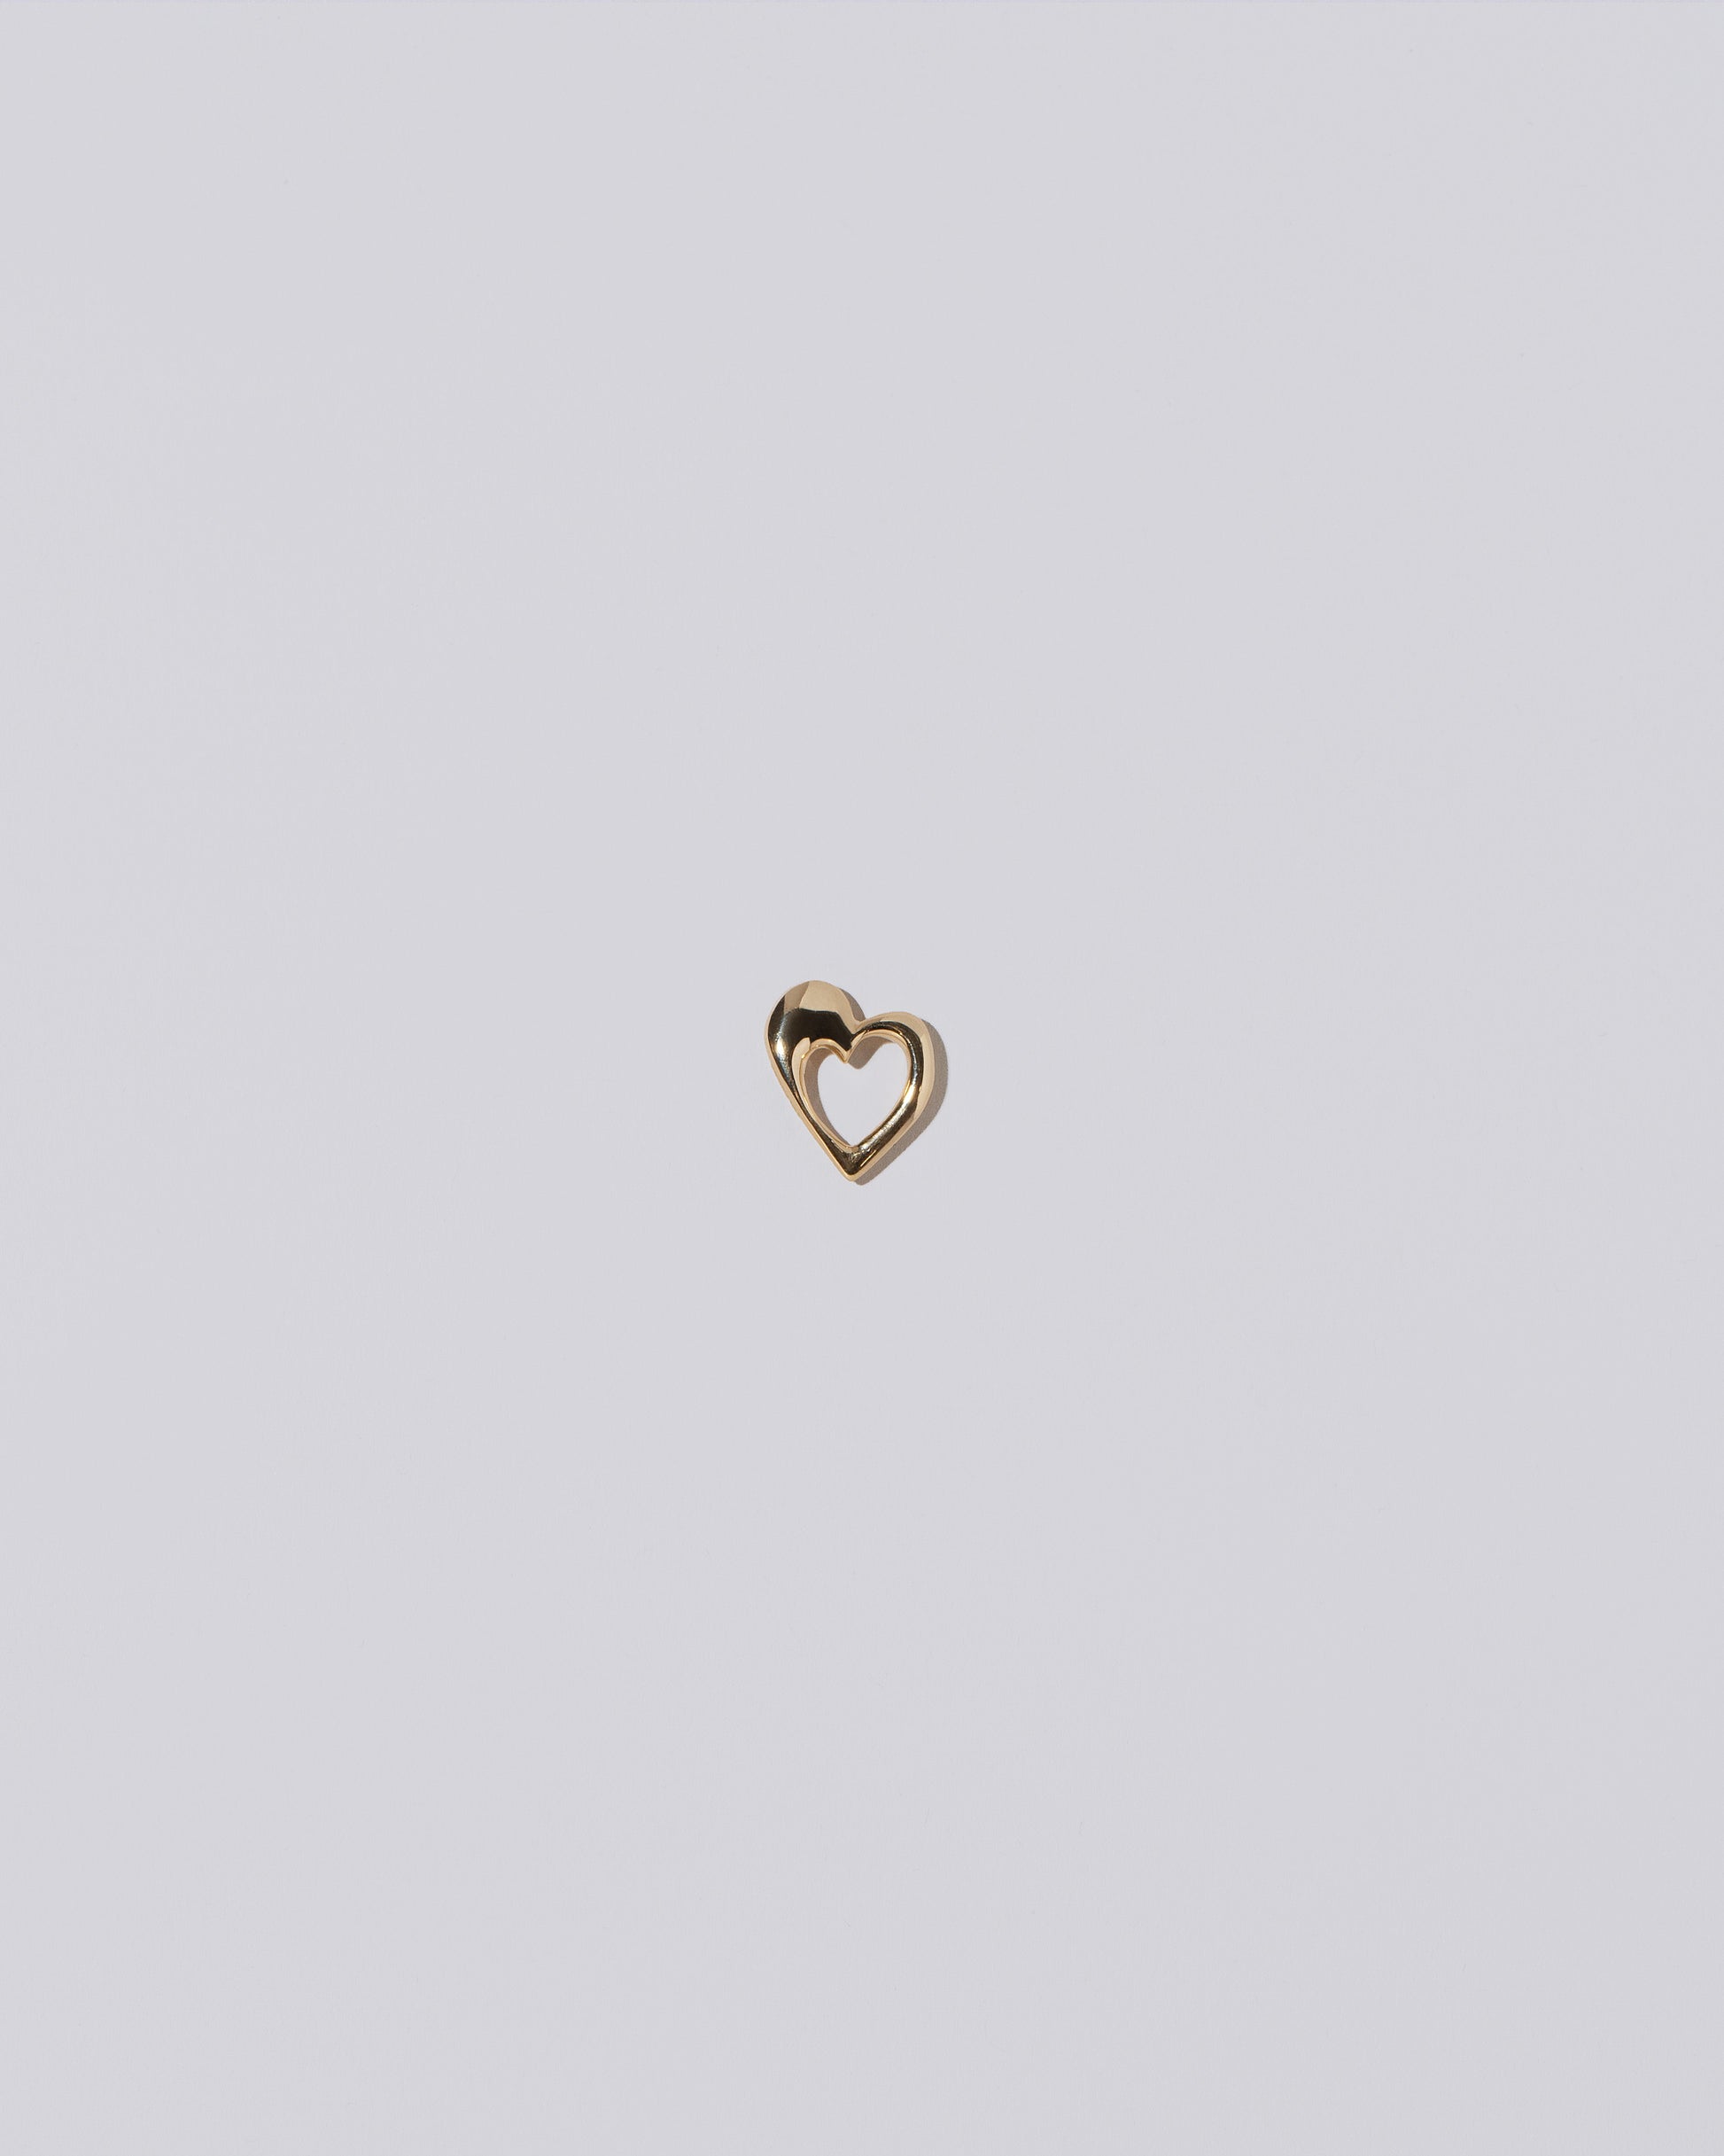 Thousand & One Night Heart Charm on light color background.